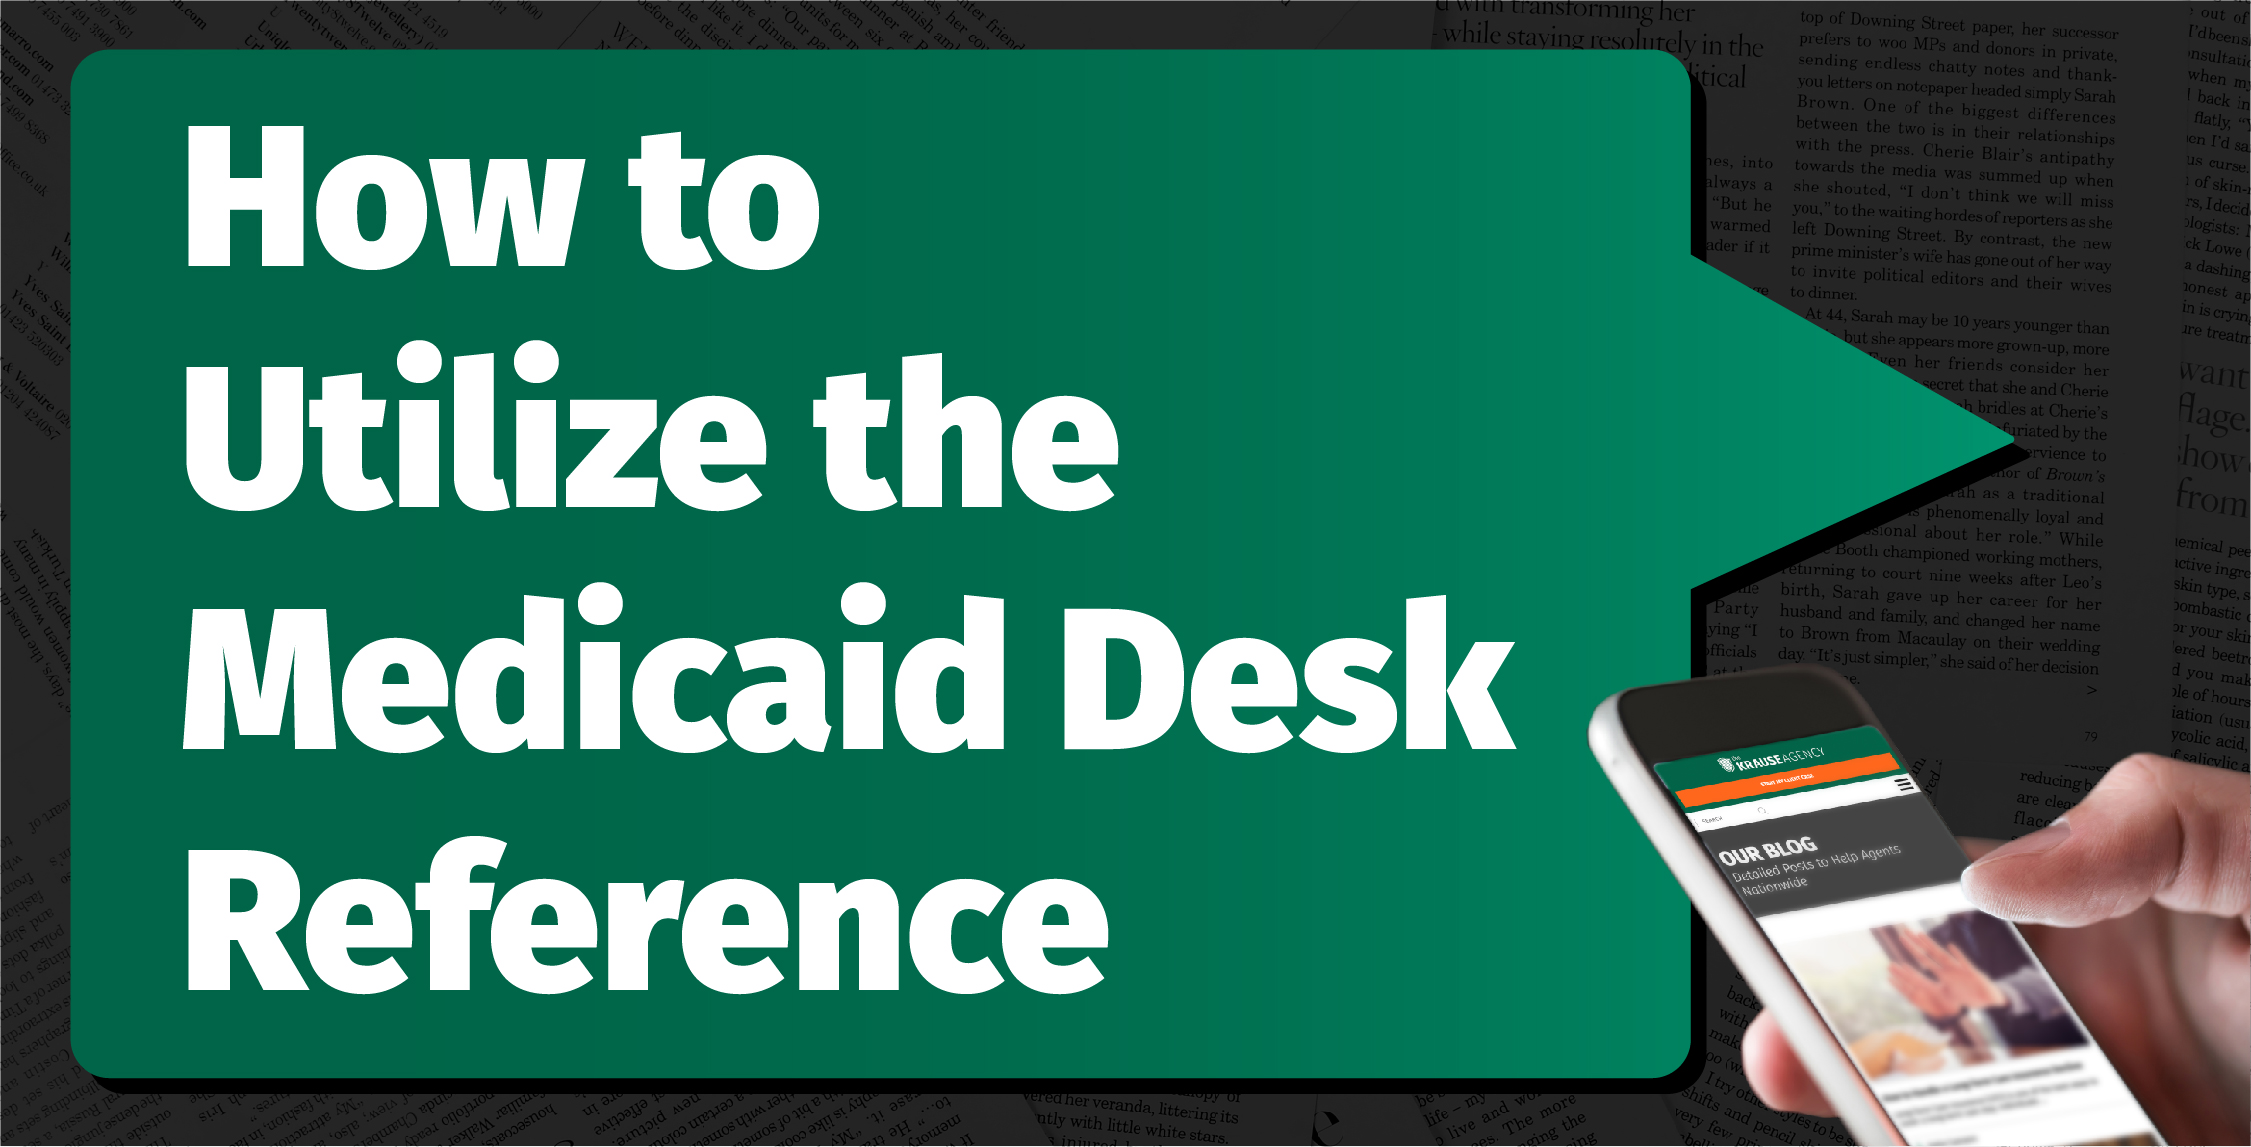 How to Use the Medicaid Desk Reference